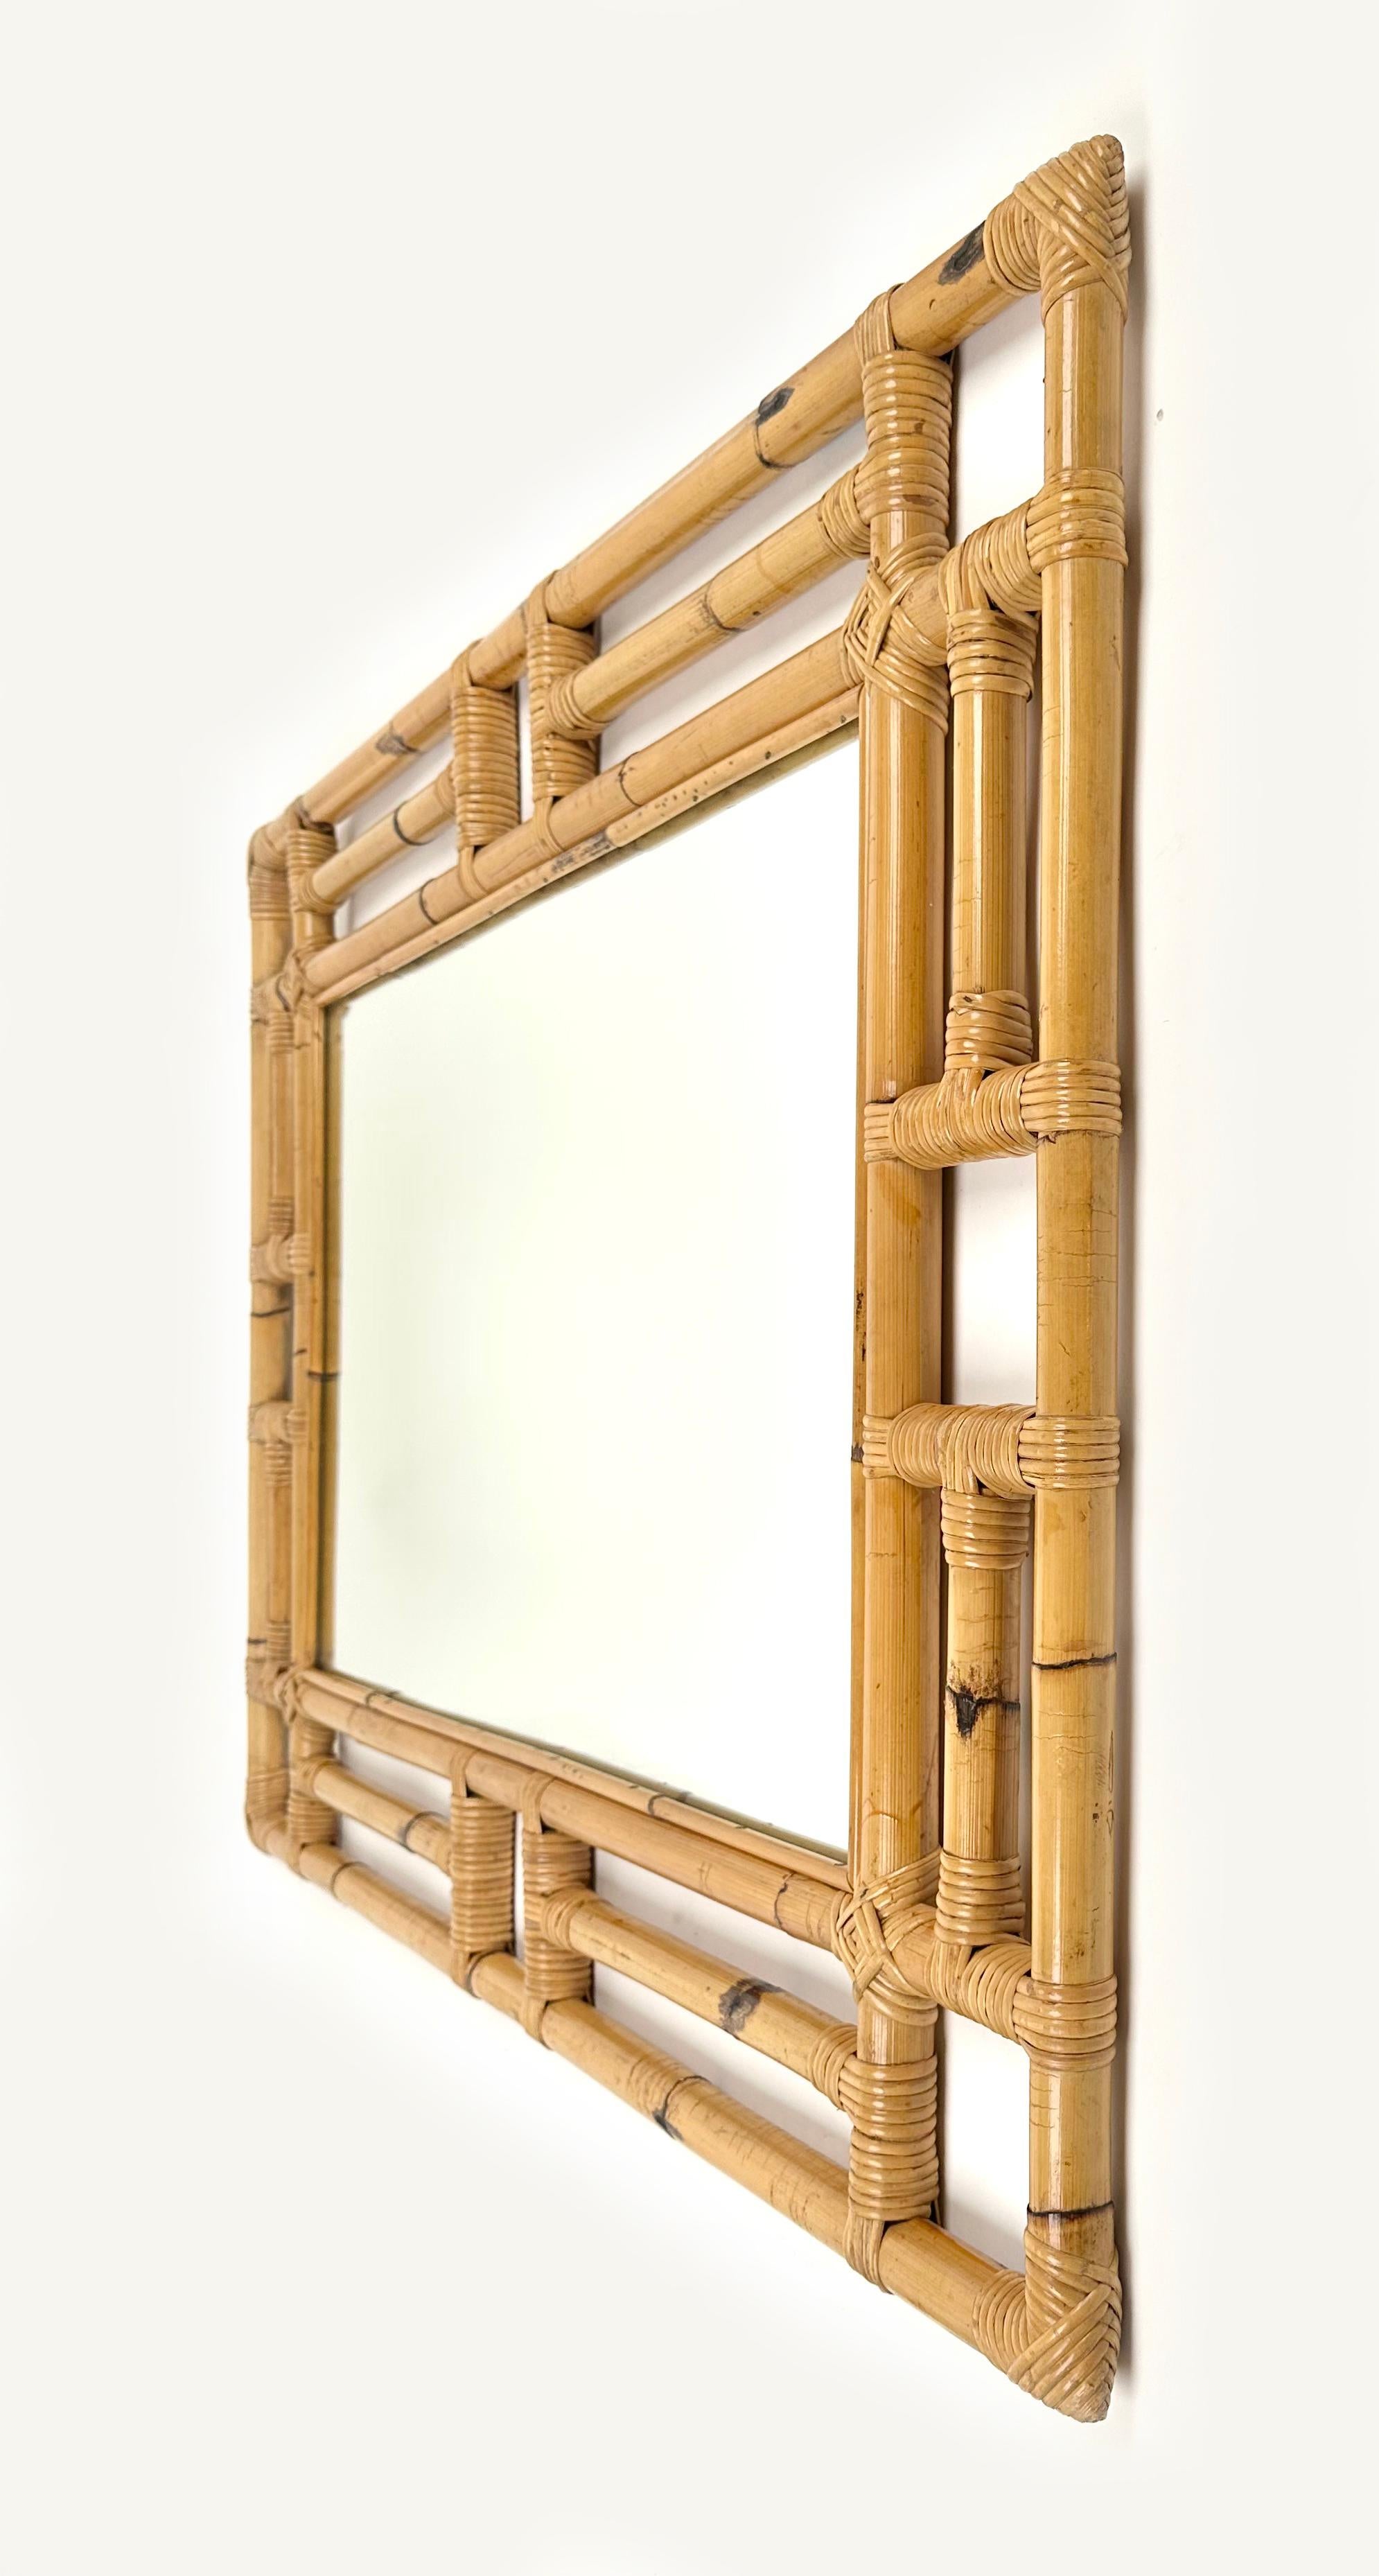 Late 20th Century Rectangular Wall Mirror in Bamboo and Rattan Vivai del Sud Style, Italy 1970s For Sale